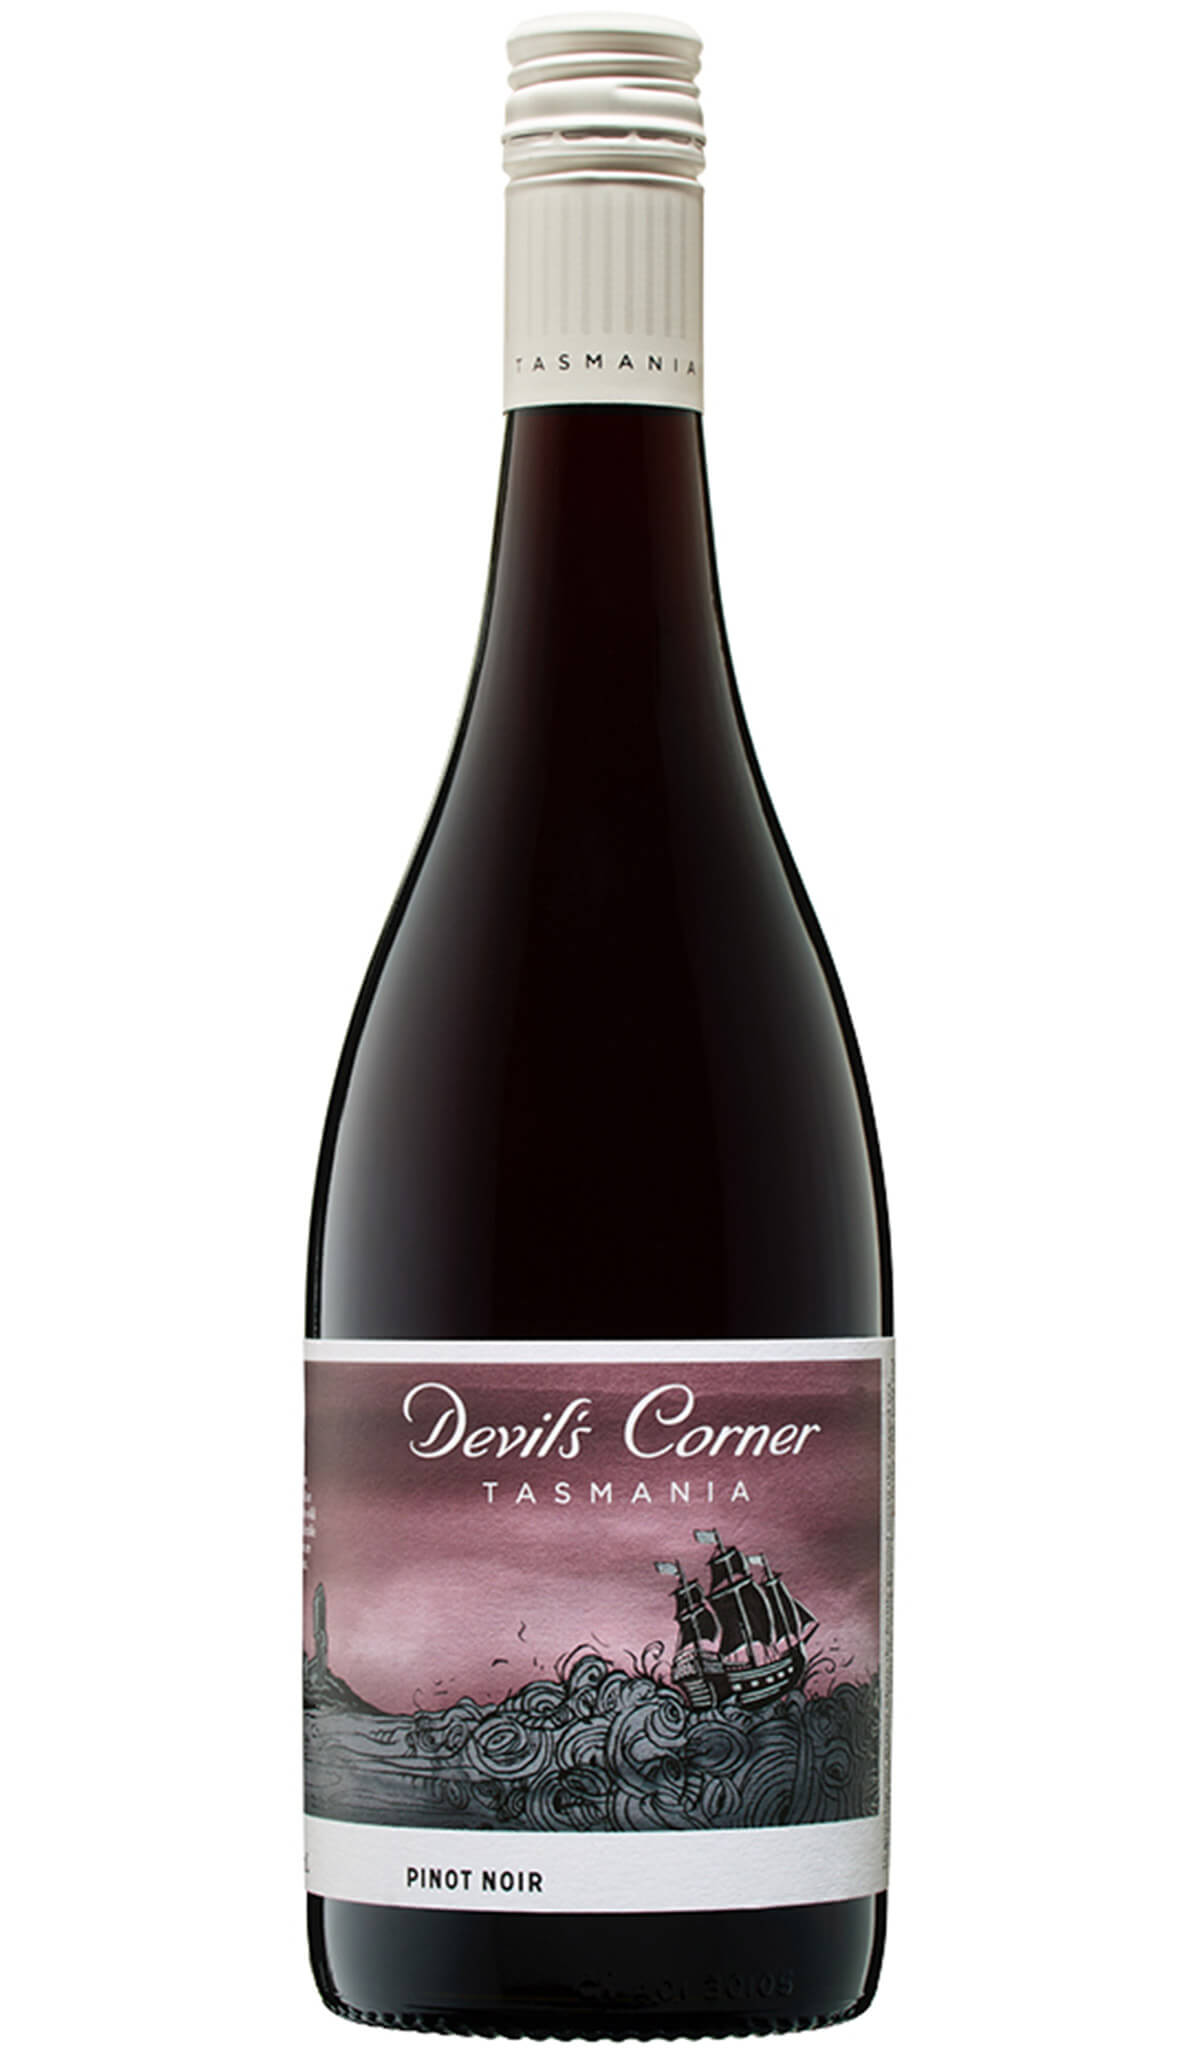 Find out more or buy Devil's Corner Pinot Noir 2022 (Tasmania) online at Wine Sellers Direct - Australia’s independent liquor specialists.